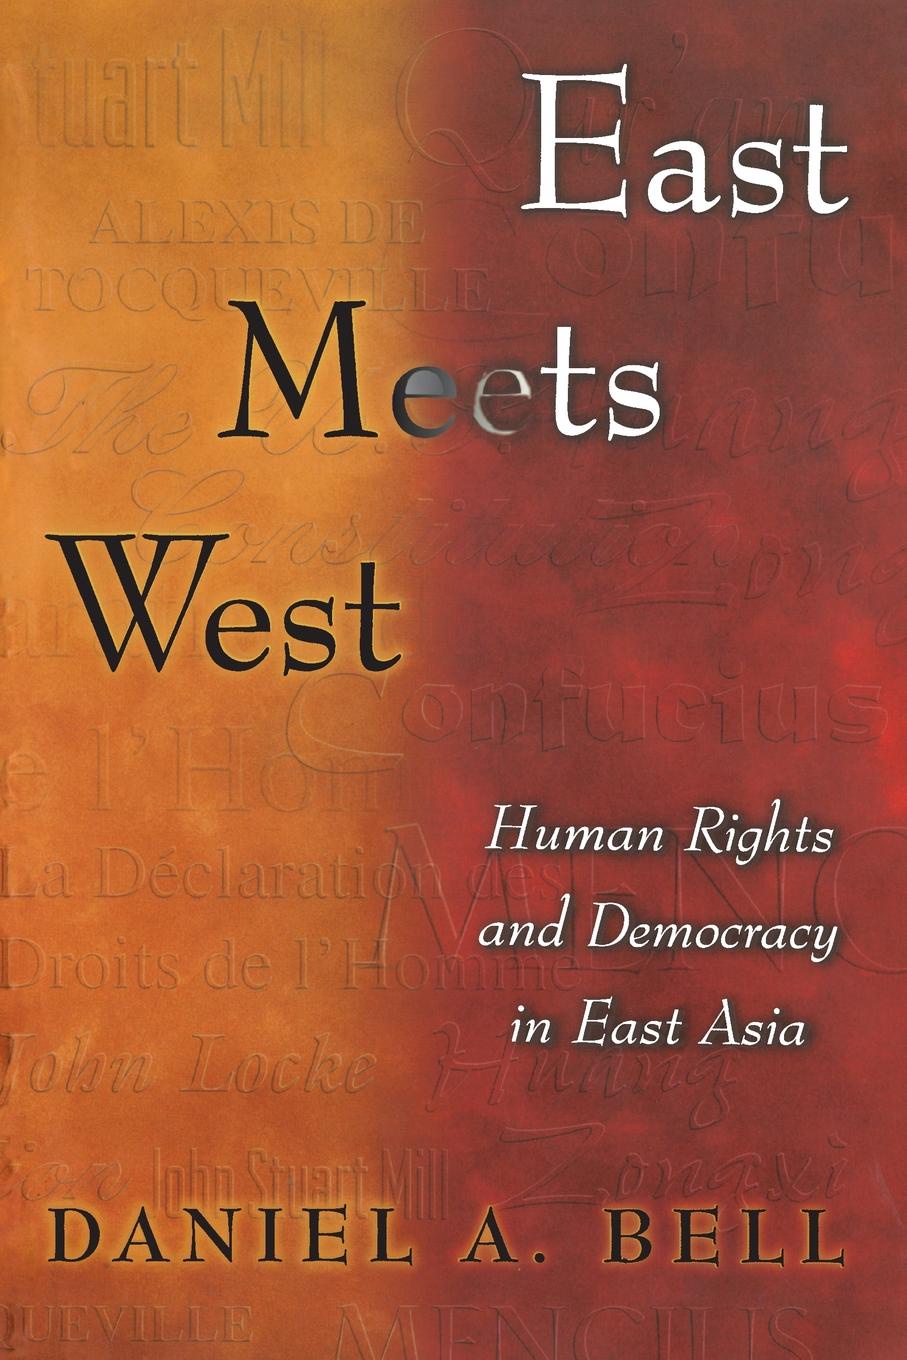 East Meets West. Human Rights and Democracy in East Asia